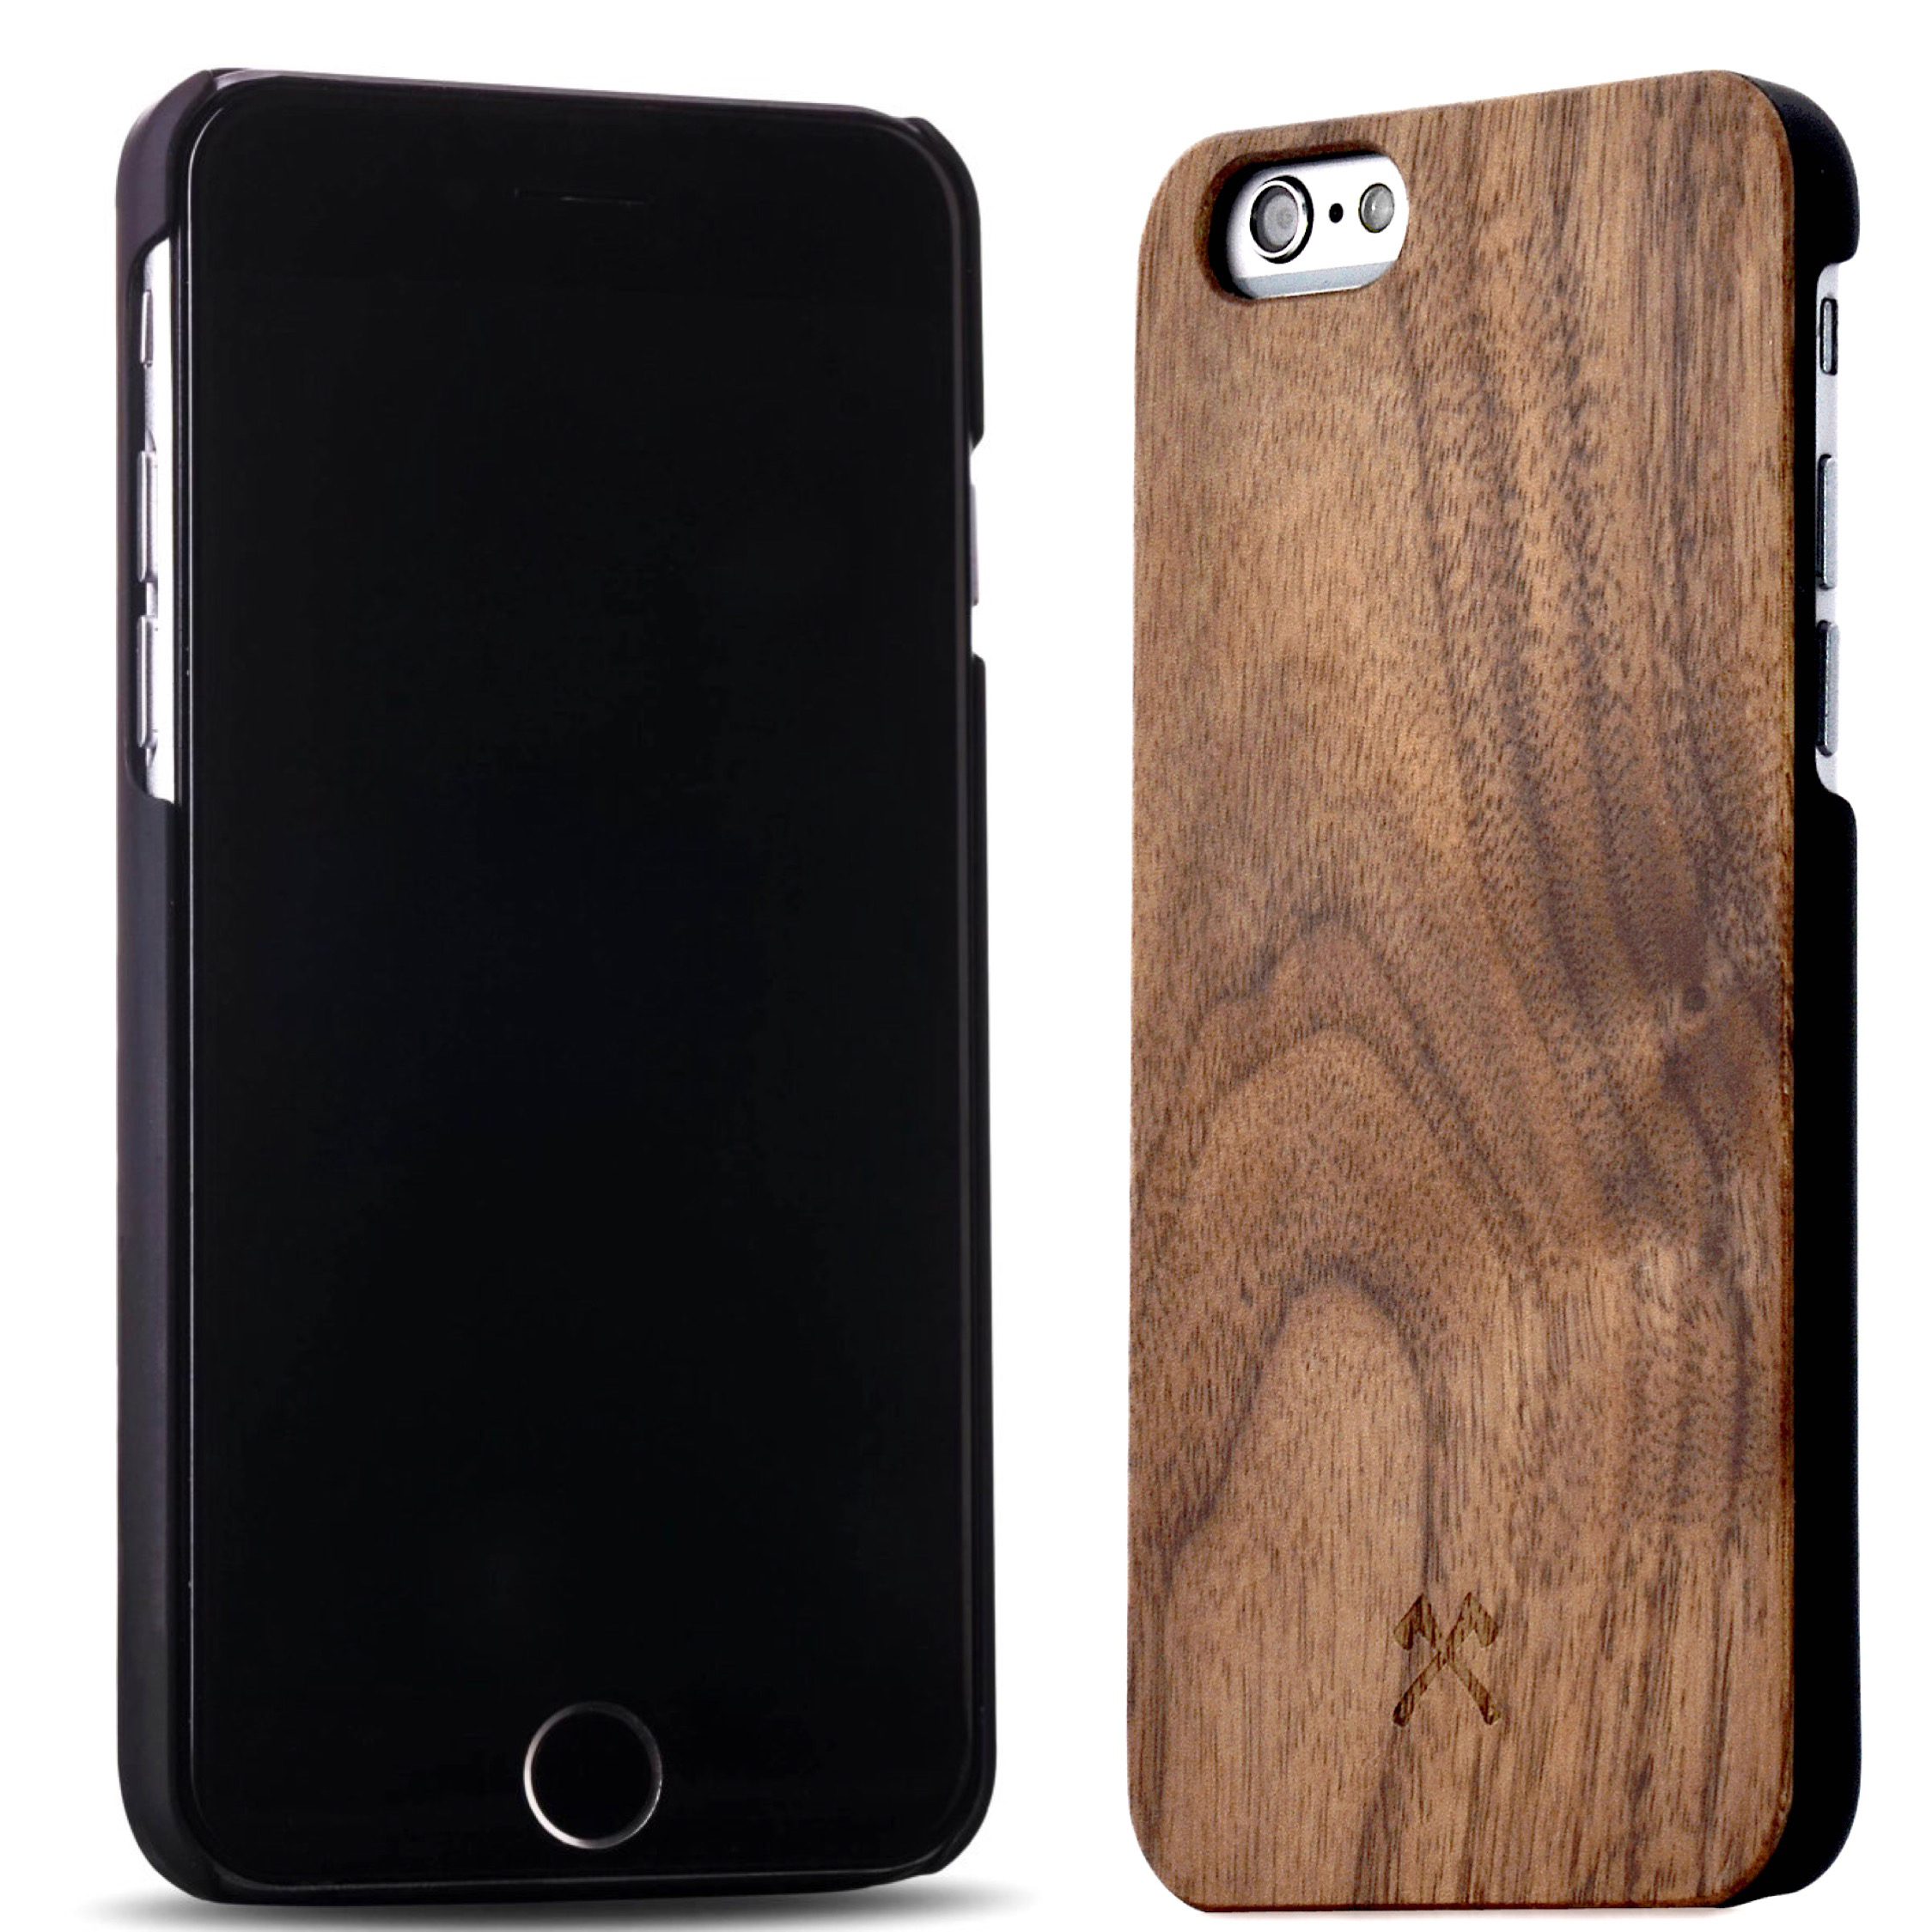 Apple, Walnuss/Schwarz Classic, iPhone 6, Backcover, EcoCase iPhone WOODCESSORIES 6s,